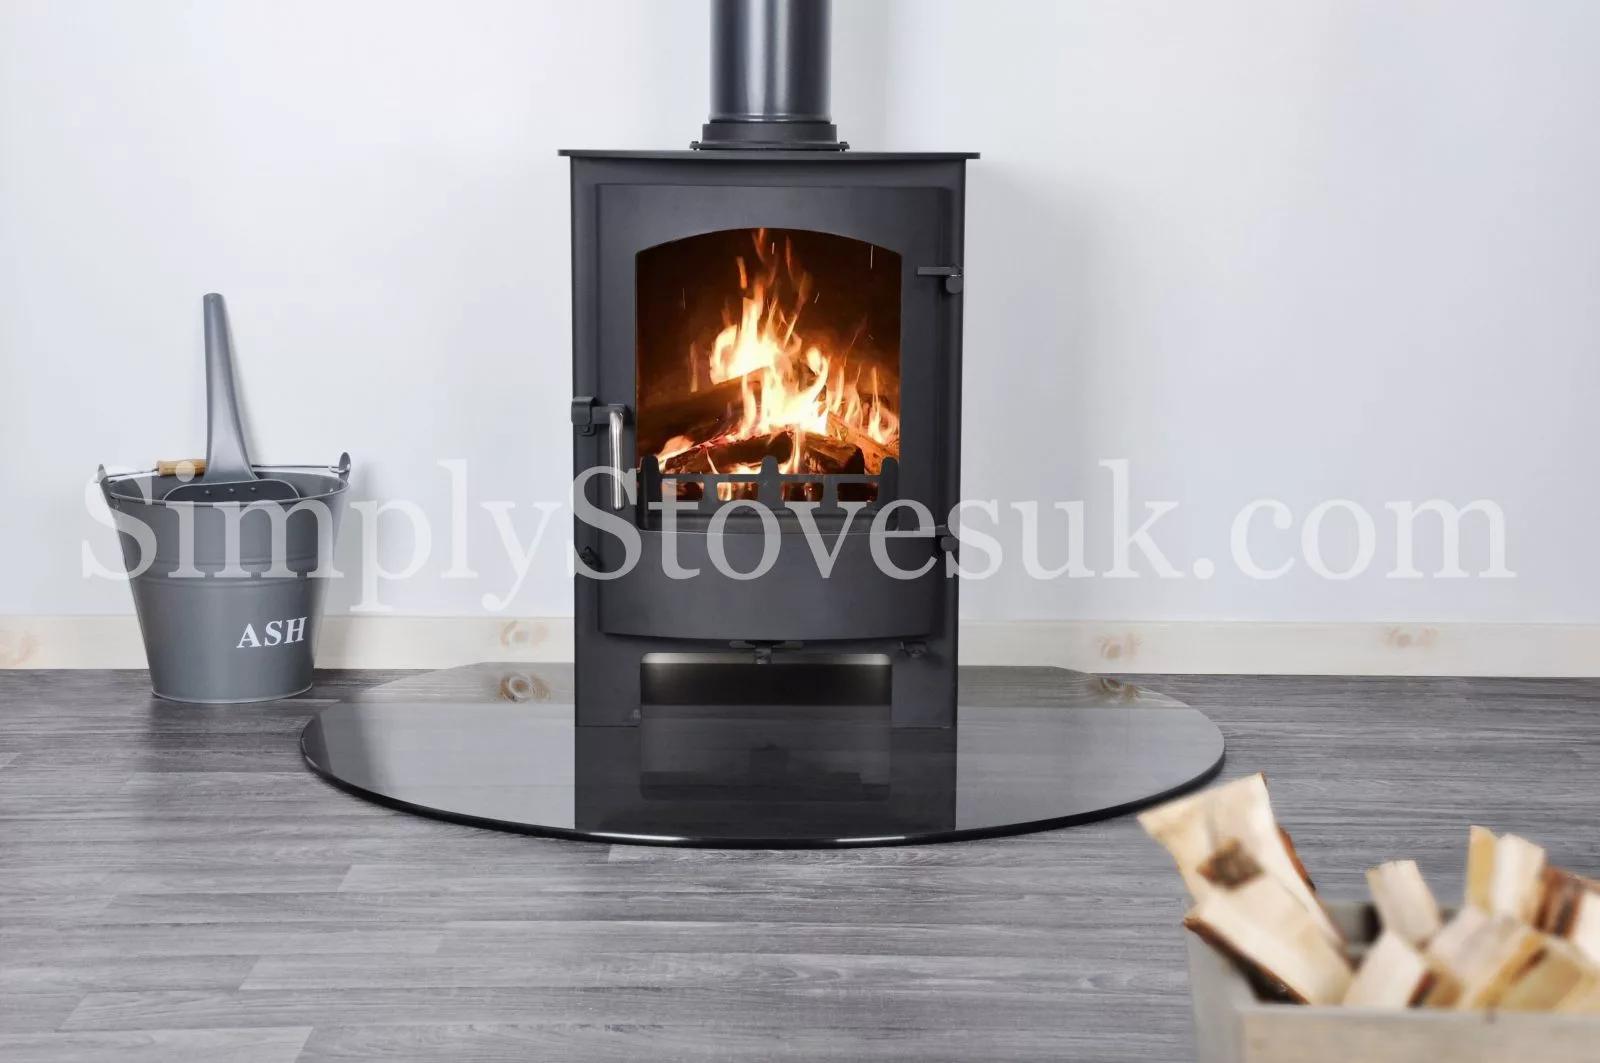 smoked glass hearth - What is the best material for a fire hearth